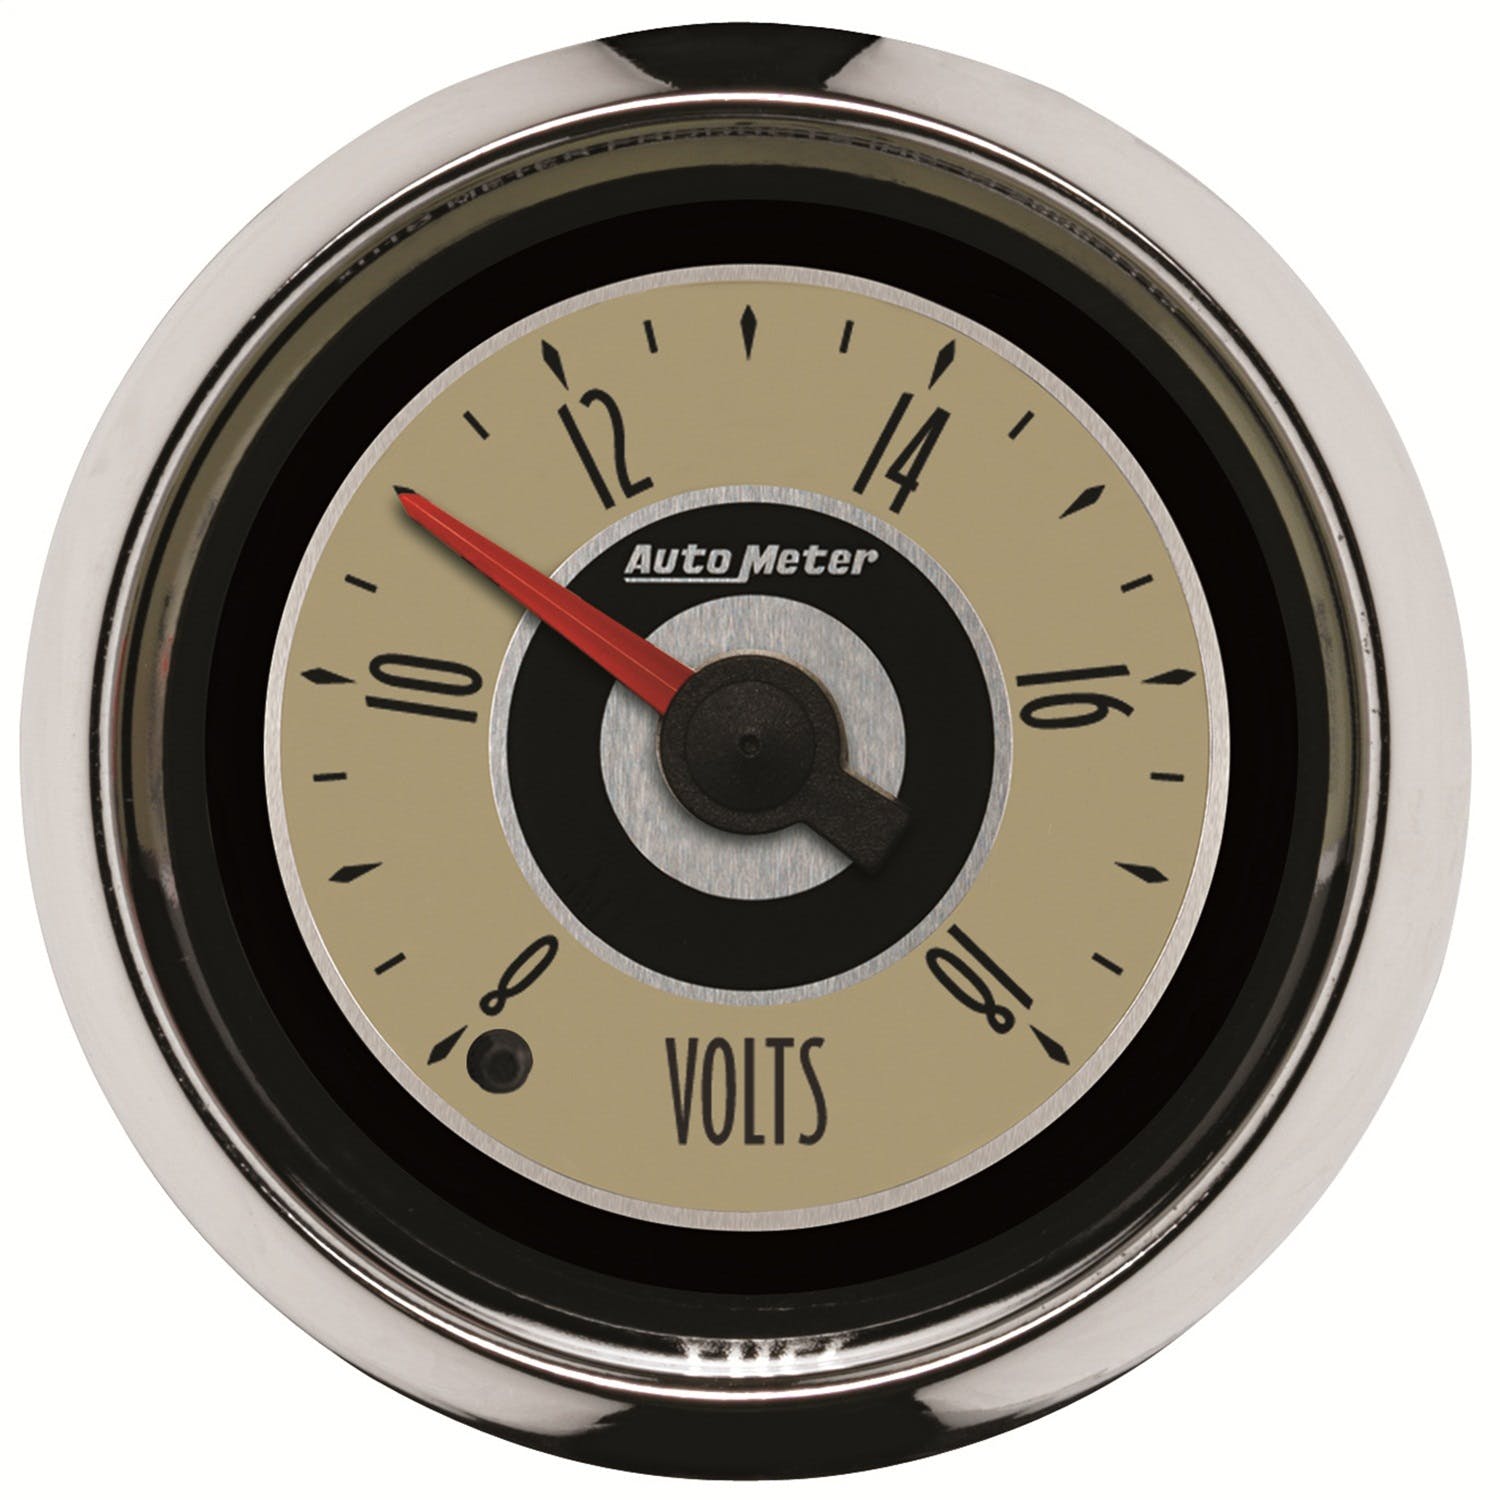 AutoMeter Products 1183 Cruiser Voltmeter Gauge 2 1/16 in. 8 - 18 Volts Full Sweep